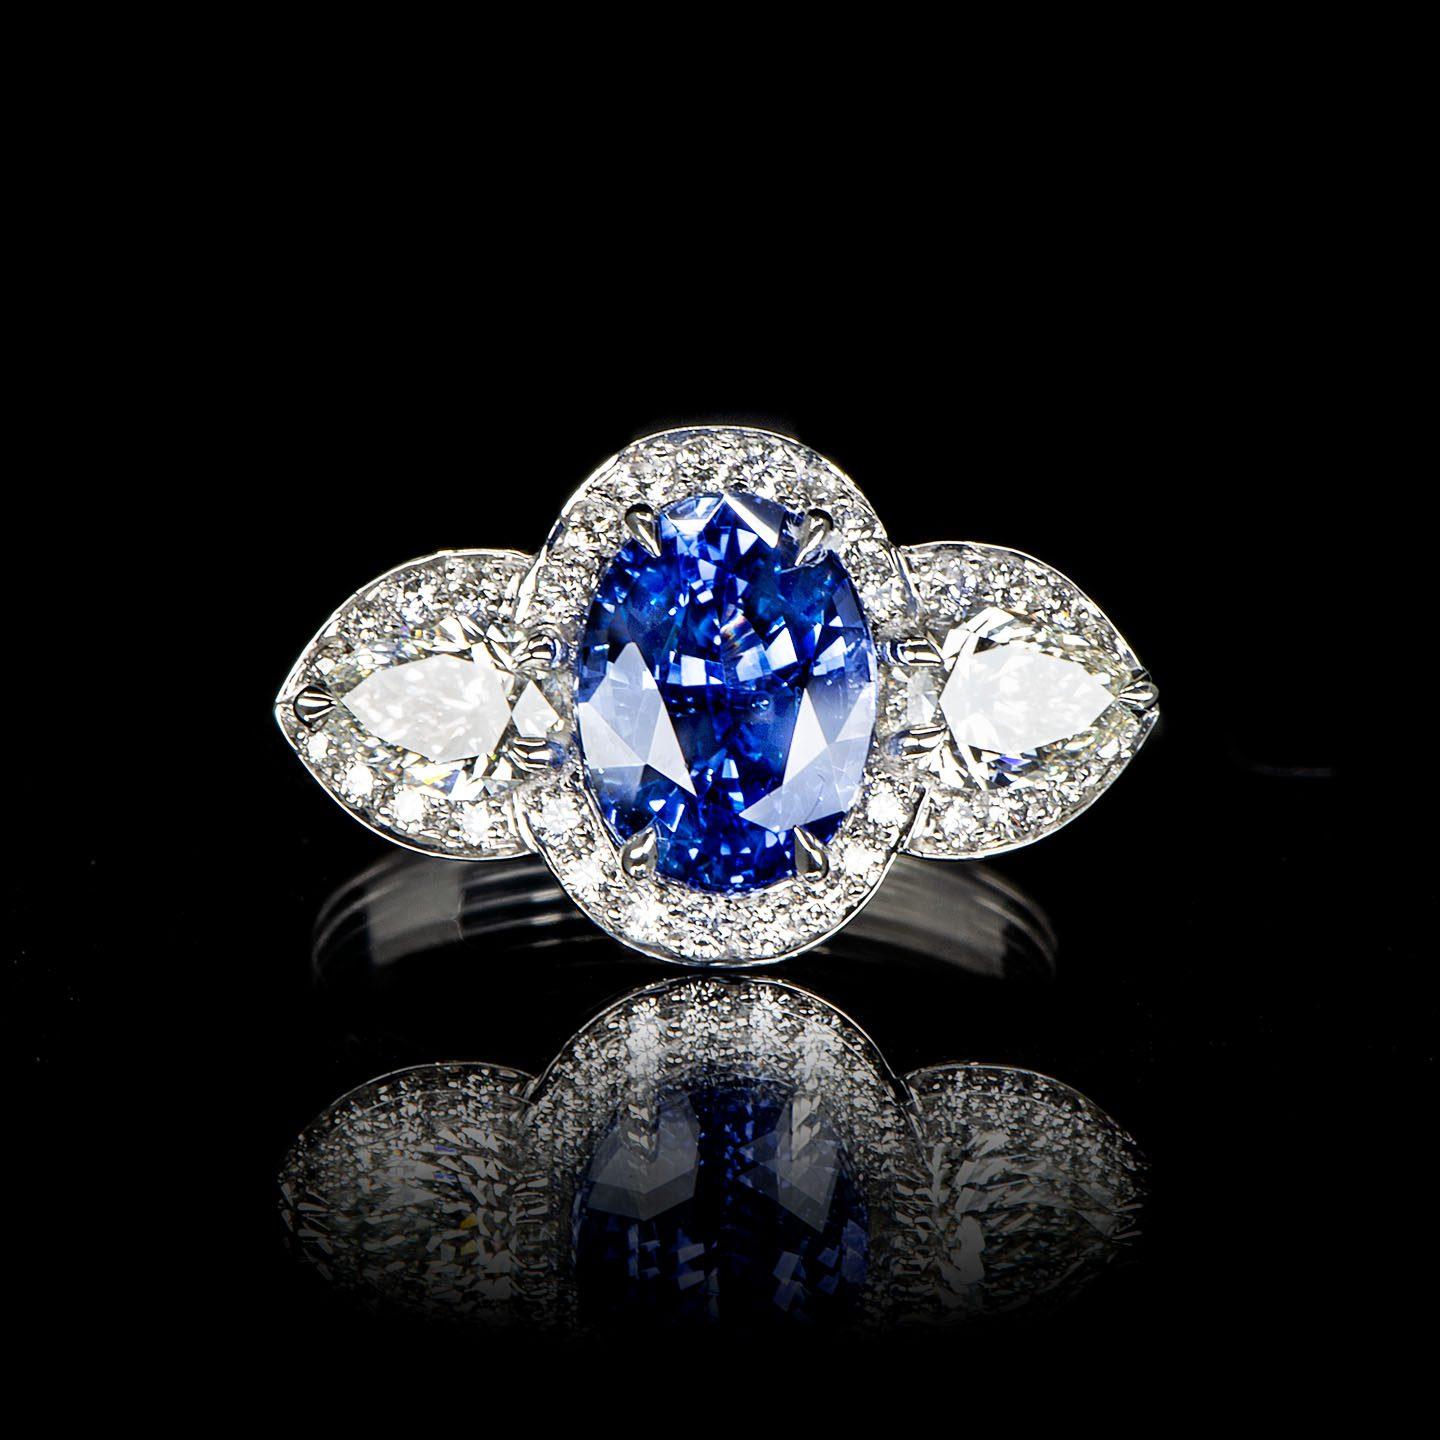 This cluster engagement ring showcases a stunning oval Ceylon Blue Sapphire weighing 2.57 carats in the centre flanked by pear-shaped diamonds (total weight of 0.78 carat, Colour F/G, Clarity VS) with all three surrounded by round brilliant diamonds